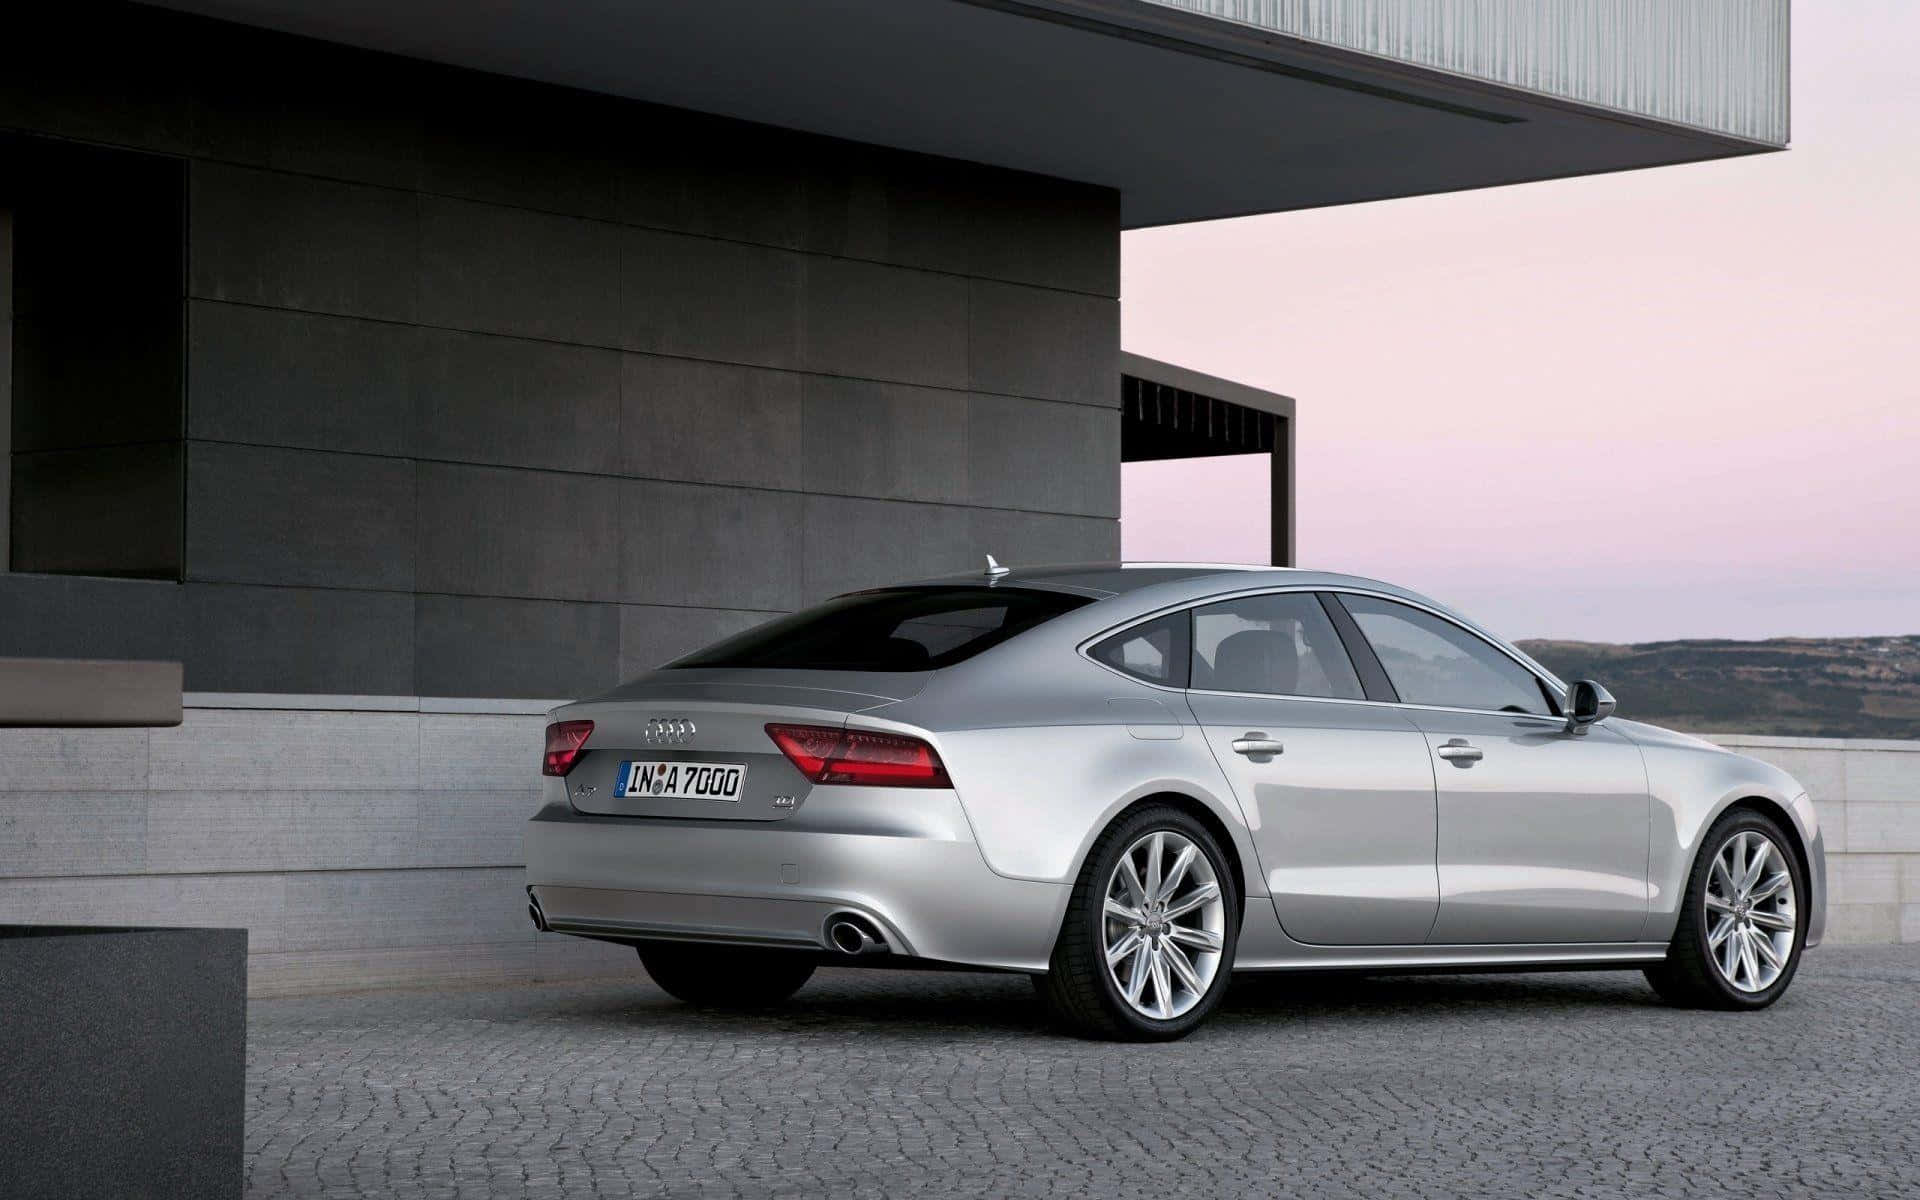 The Sleek and Luxurious Audi S7 Wallpaper